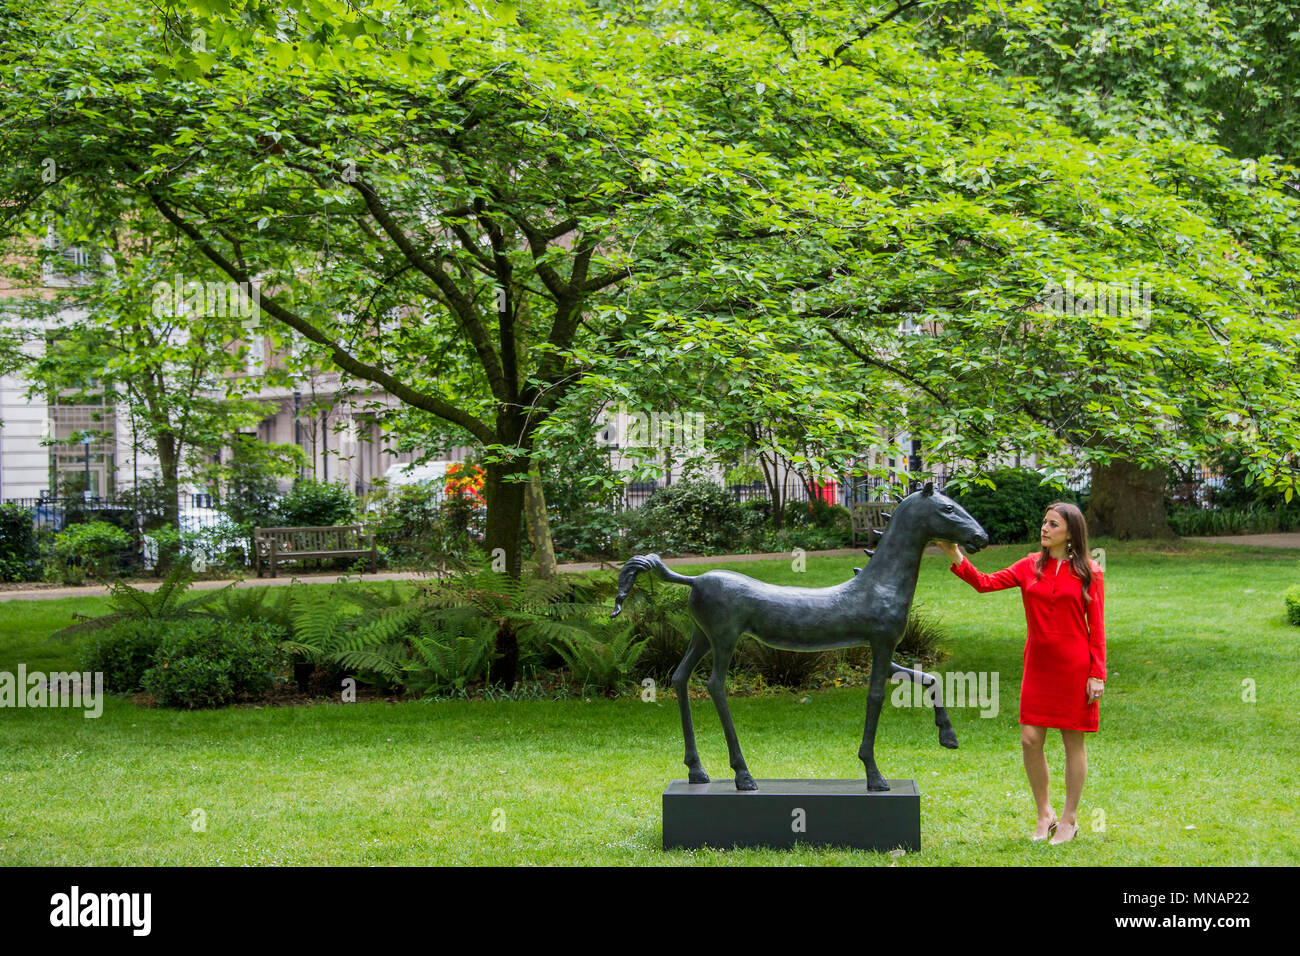 London, UK. 16th May 2018. Barry Flanagan, Field Day 2 (Kore Horse), 1987 - Christie’s will present ‘Sculpture in the Square’ an outdoor sculpture garden set within St James’s Square, London, on view to the public from 17 May to 20 June 2018. Credit: Guy Bell/Alamy Live News Stock Photo